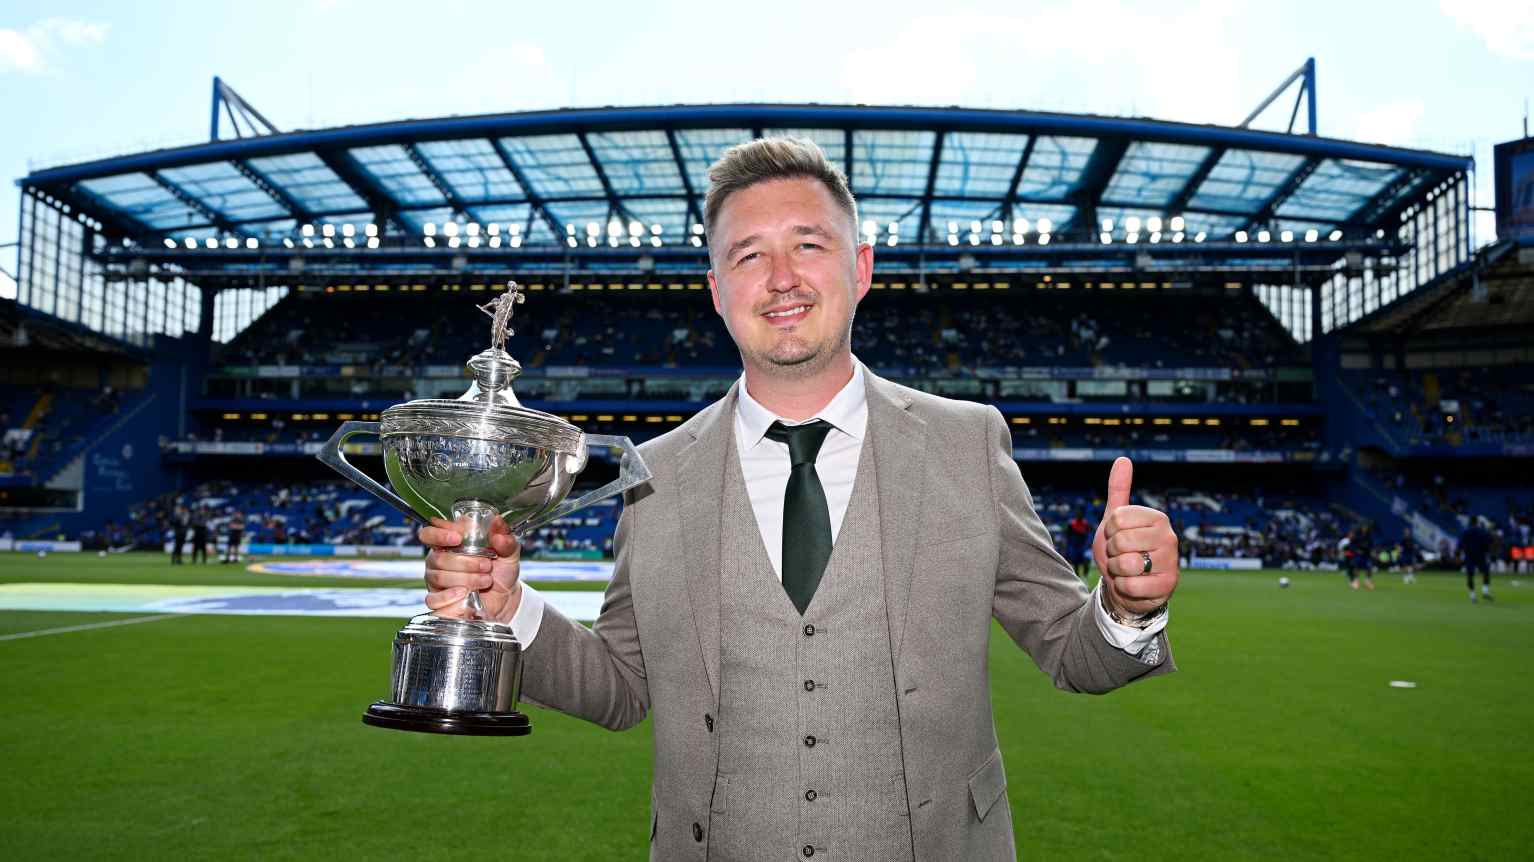 Kyren Wilson presented the World Cup trophy at Stamford Bridge on May 19.